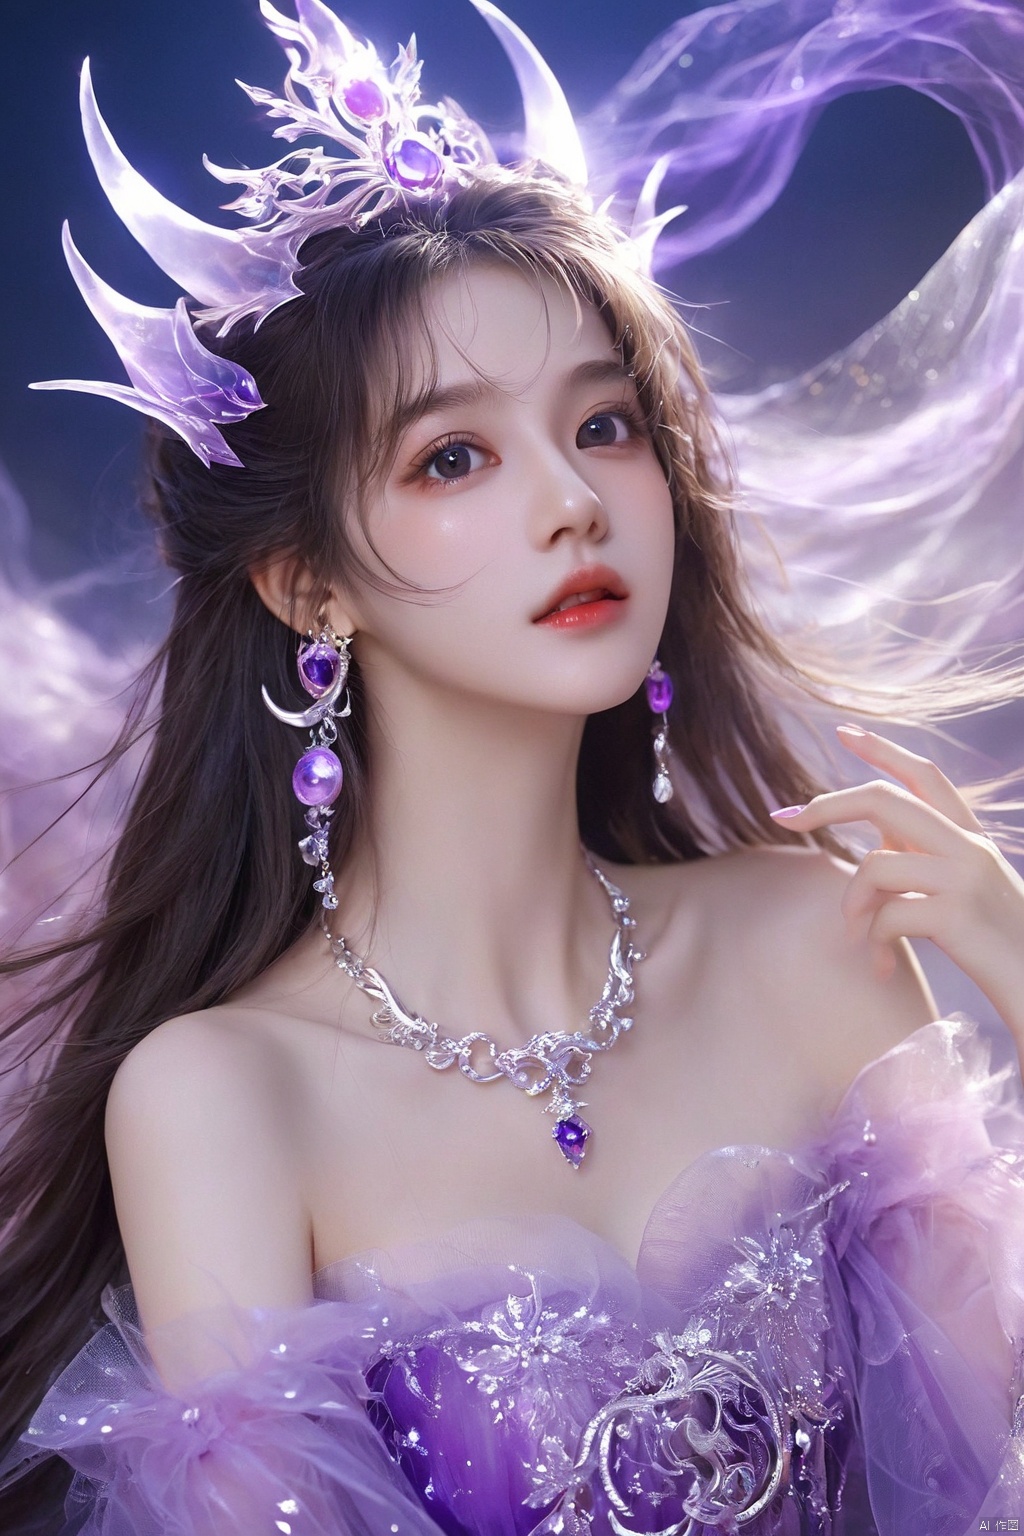 Clothing, jewelry, necklaces, glittering skirts, tulle, light, transparent, flowing, underworld, hell, goblins, gradient hair, long hair, sticking out the tongue, winking, close-up, (purple eyes), crescent, girl, beauty, xinyue,Beauty